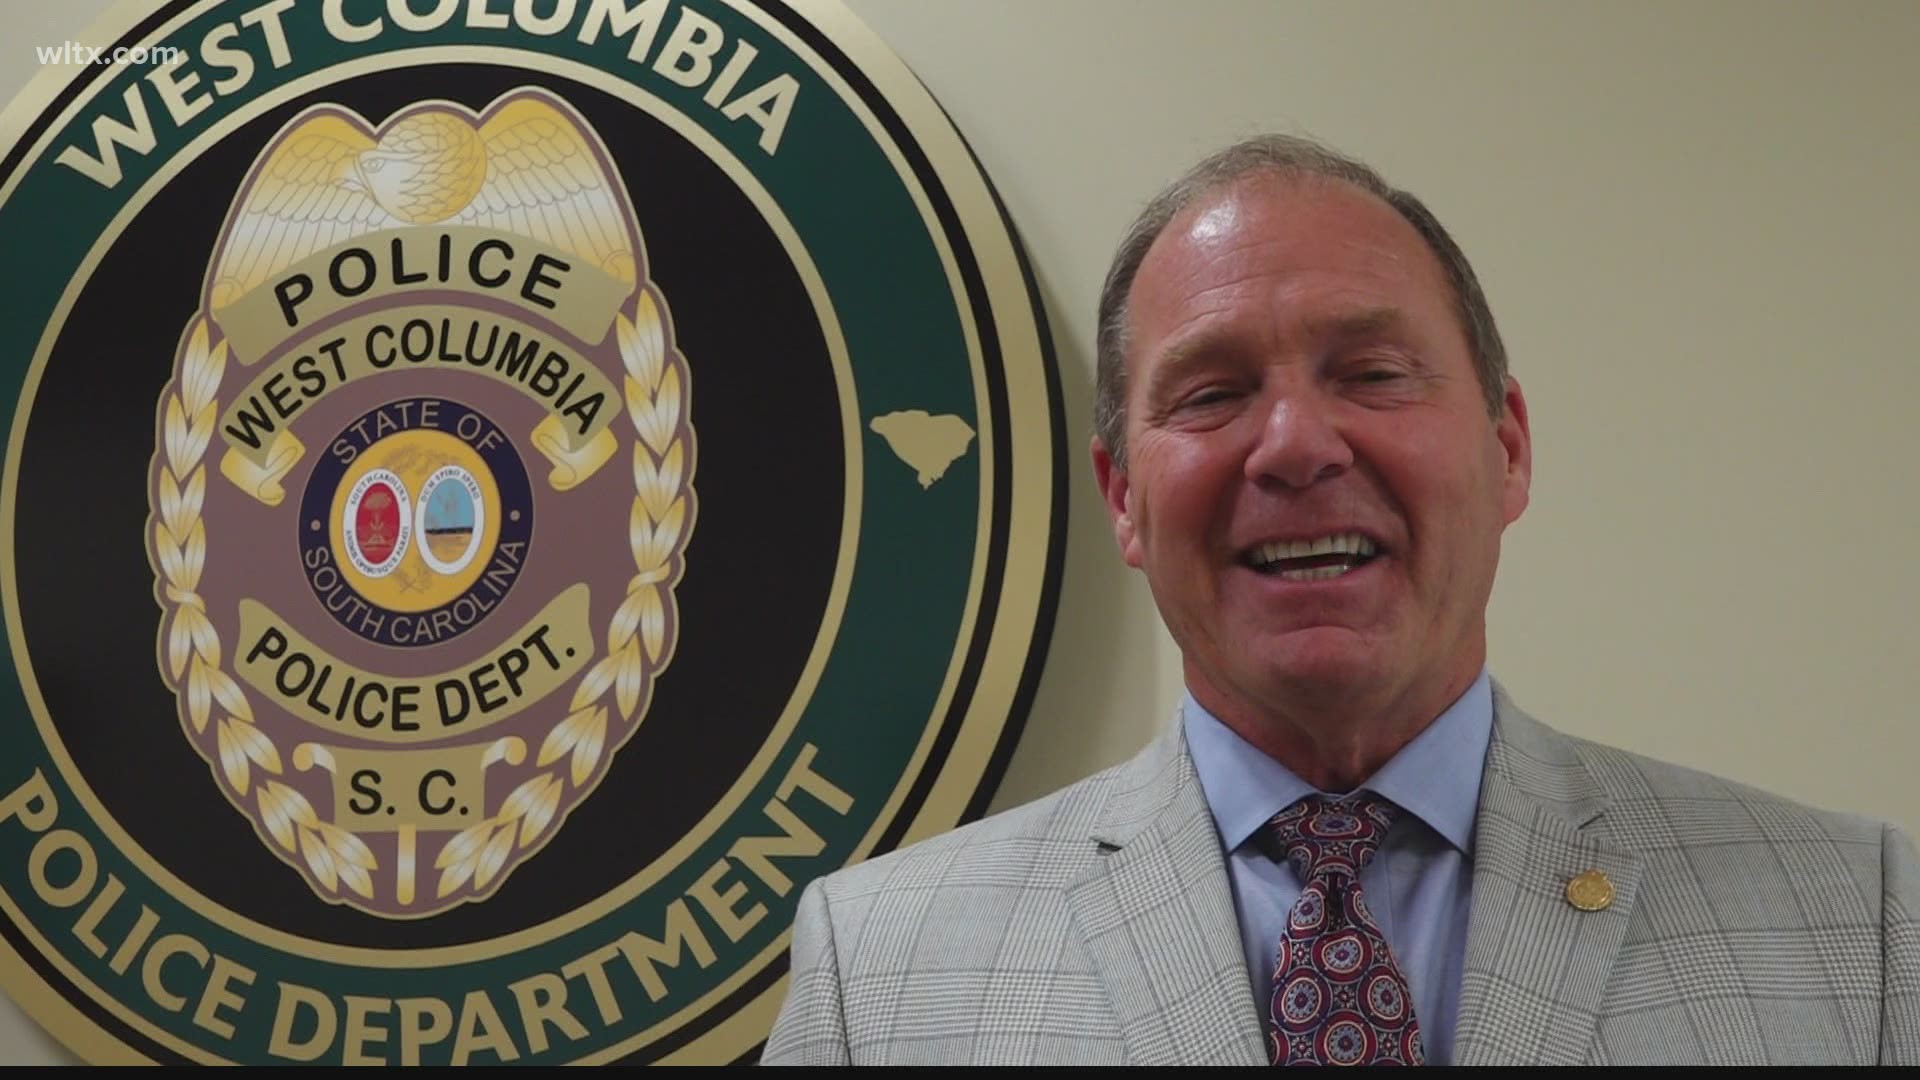 Chief Dennis Tyndall is getting ready for retirement but will stay in the department until his replacement is chosen.